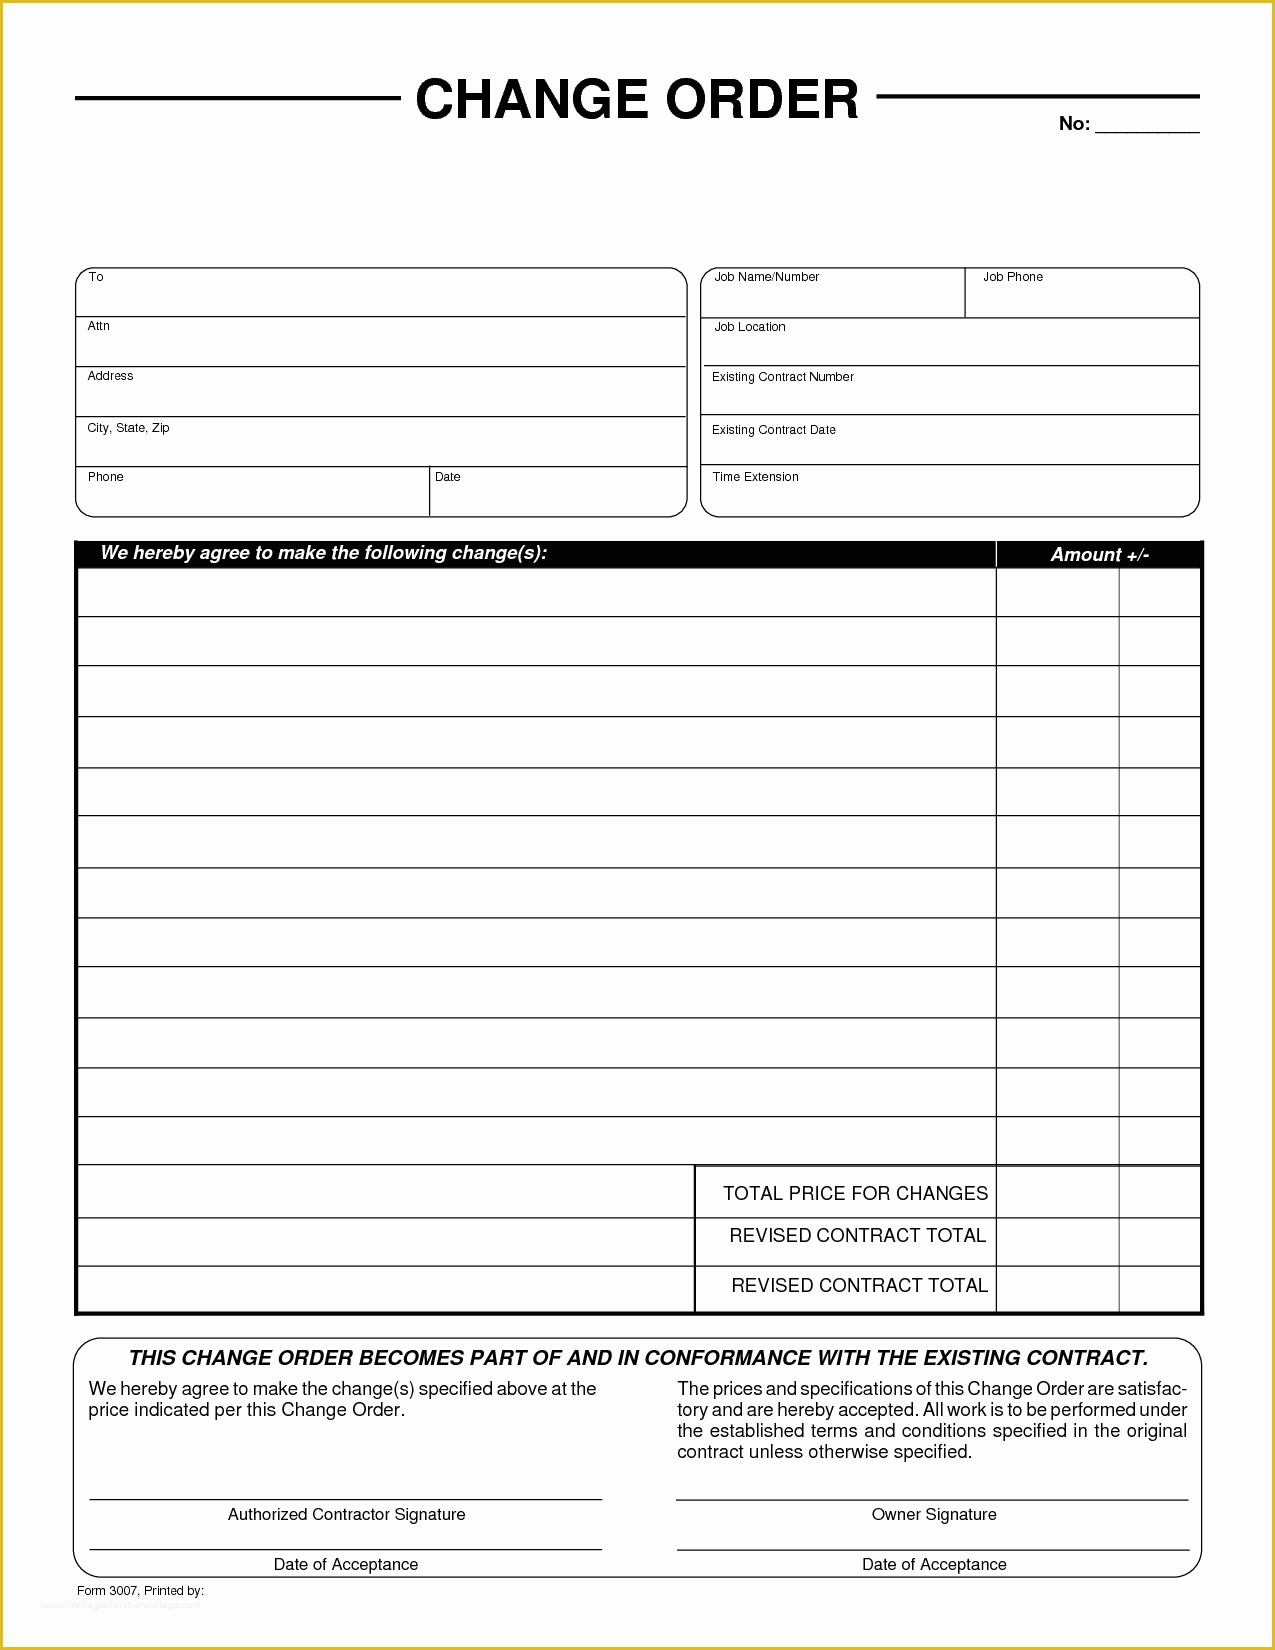 Free Construction Sign Templates Of Change Of order form by Liferetreat Change order form